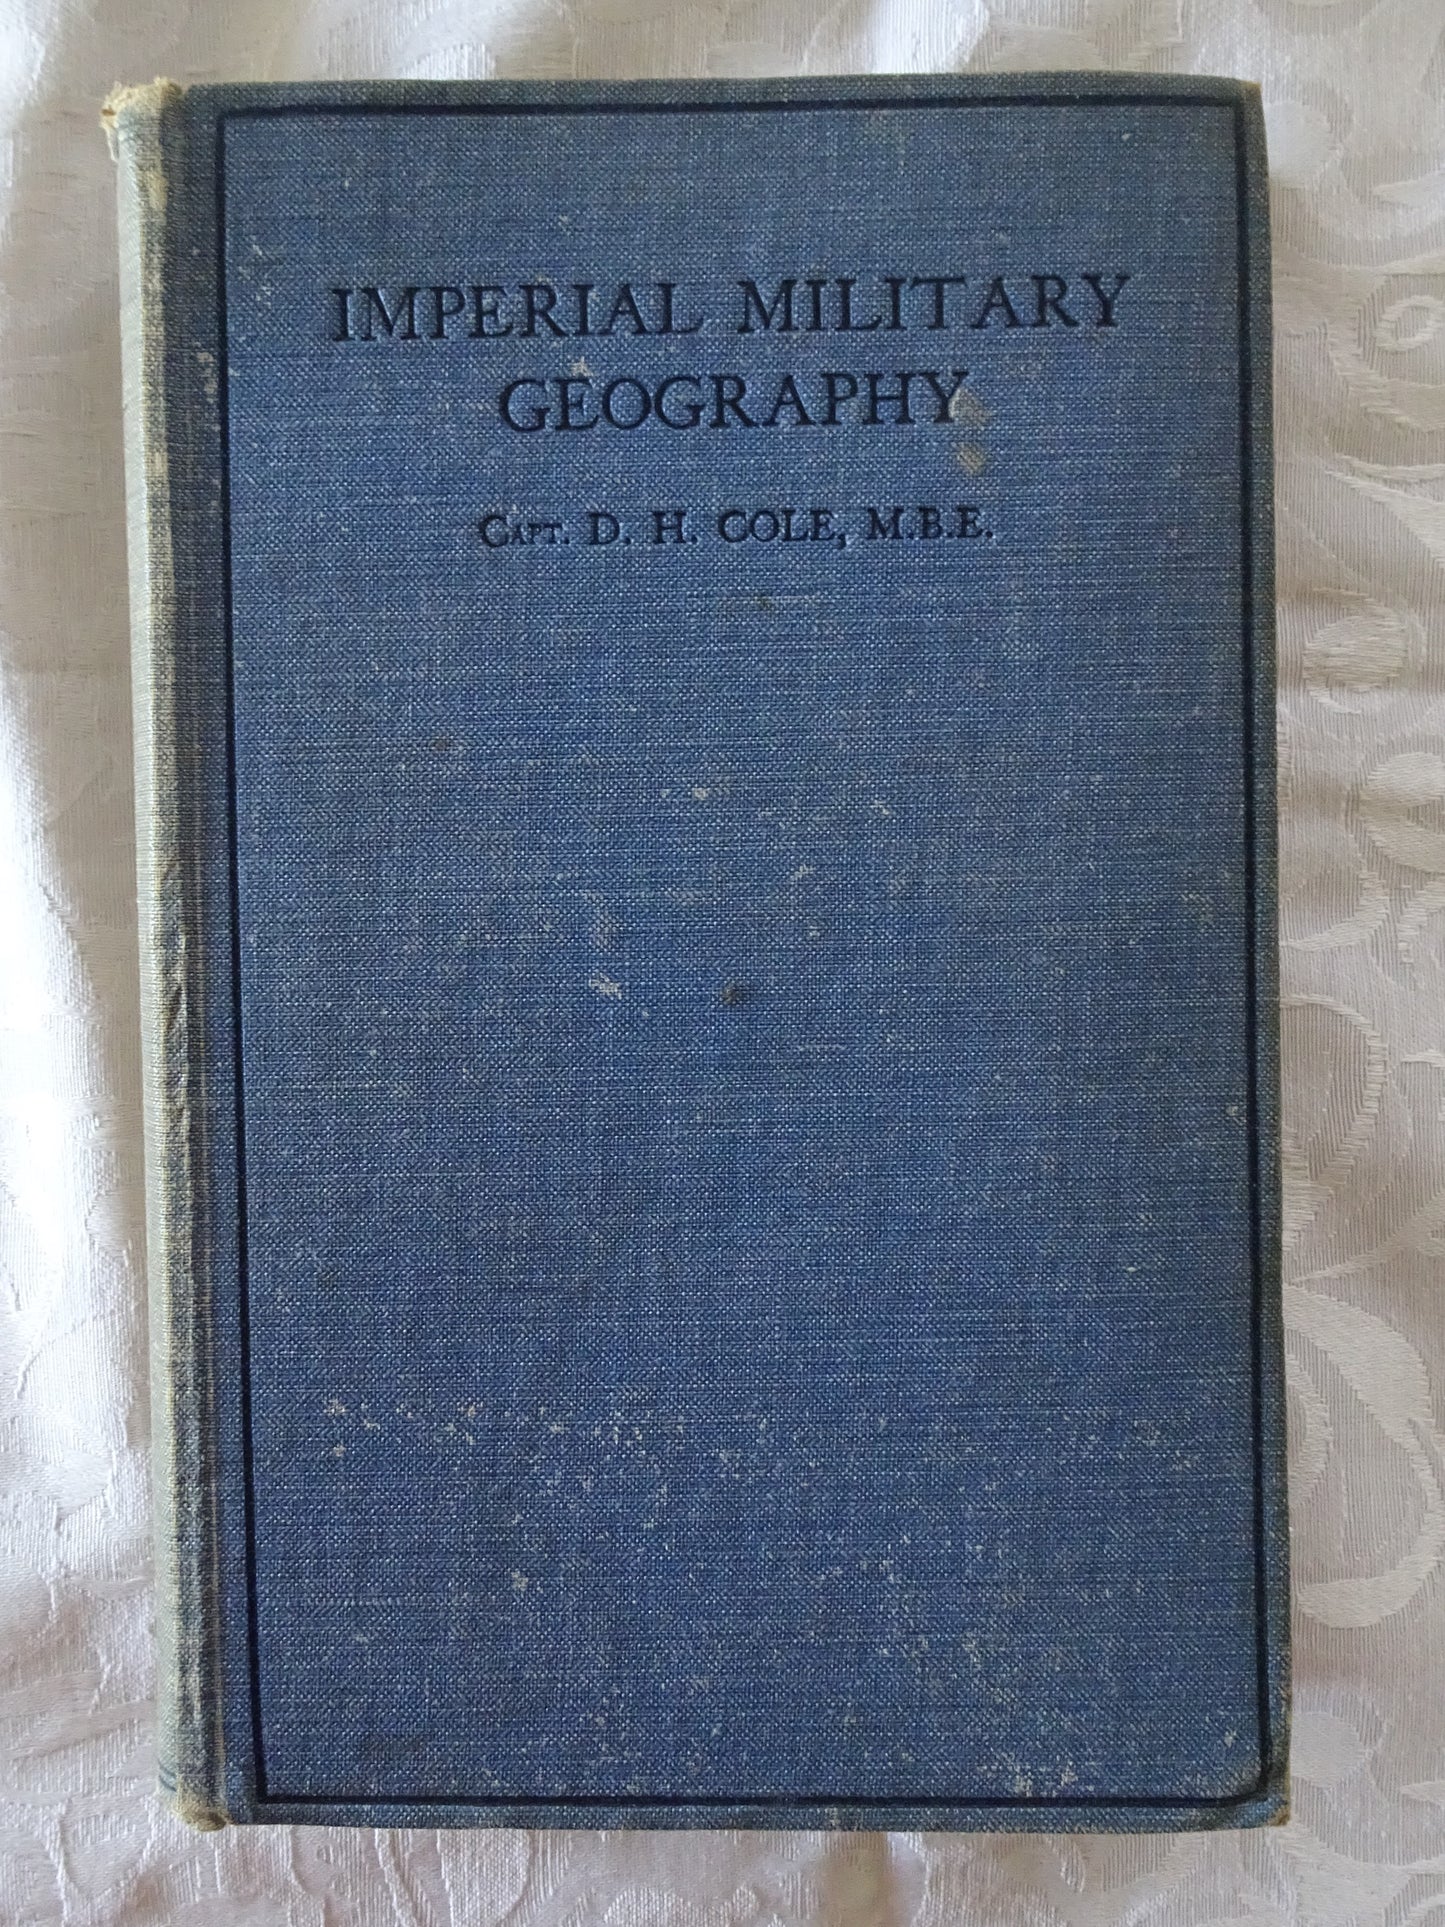 Imperial Military Geography by Captain D. H. Cole